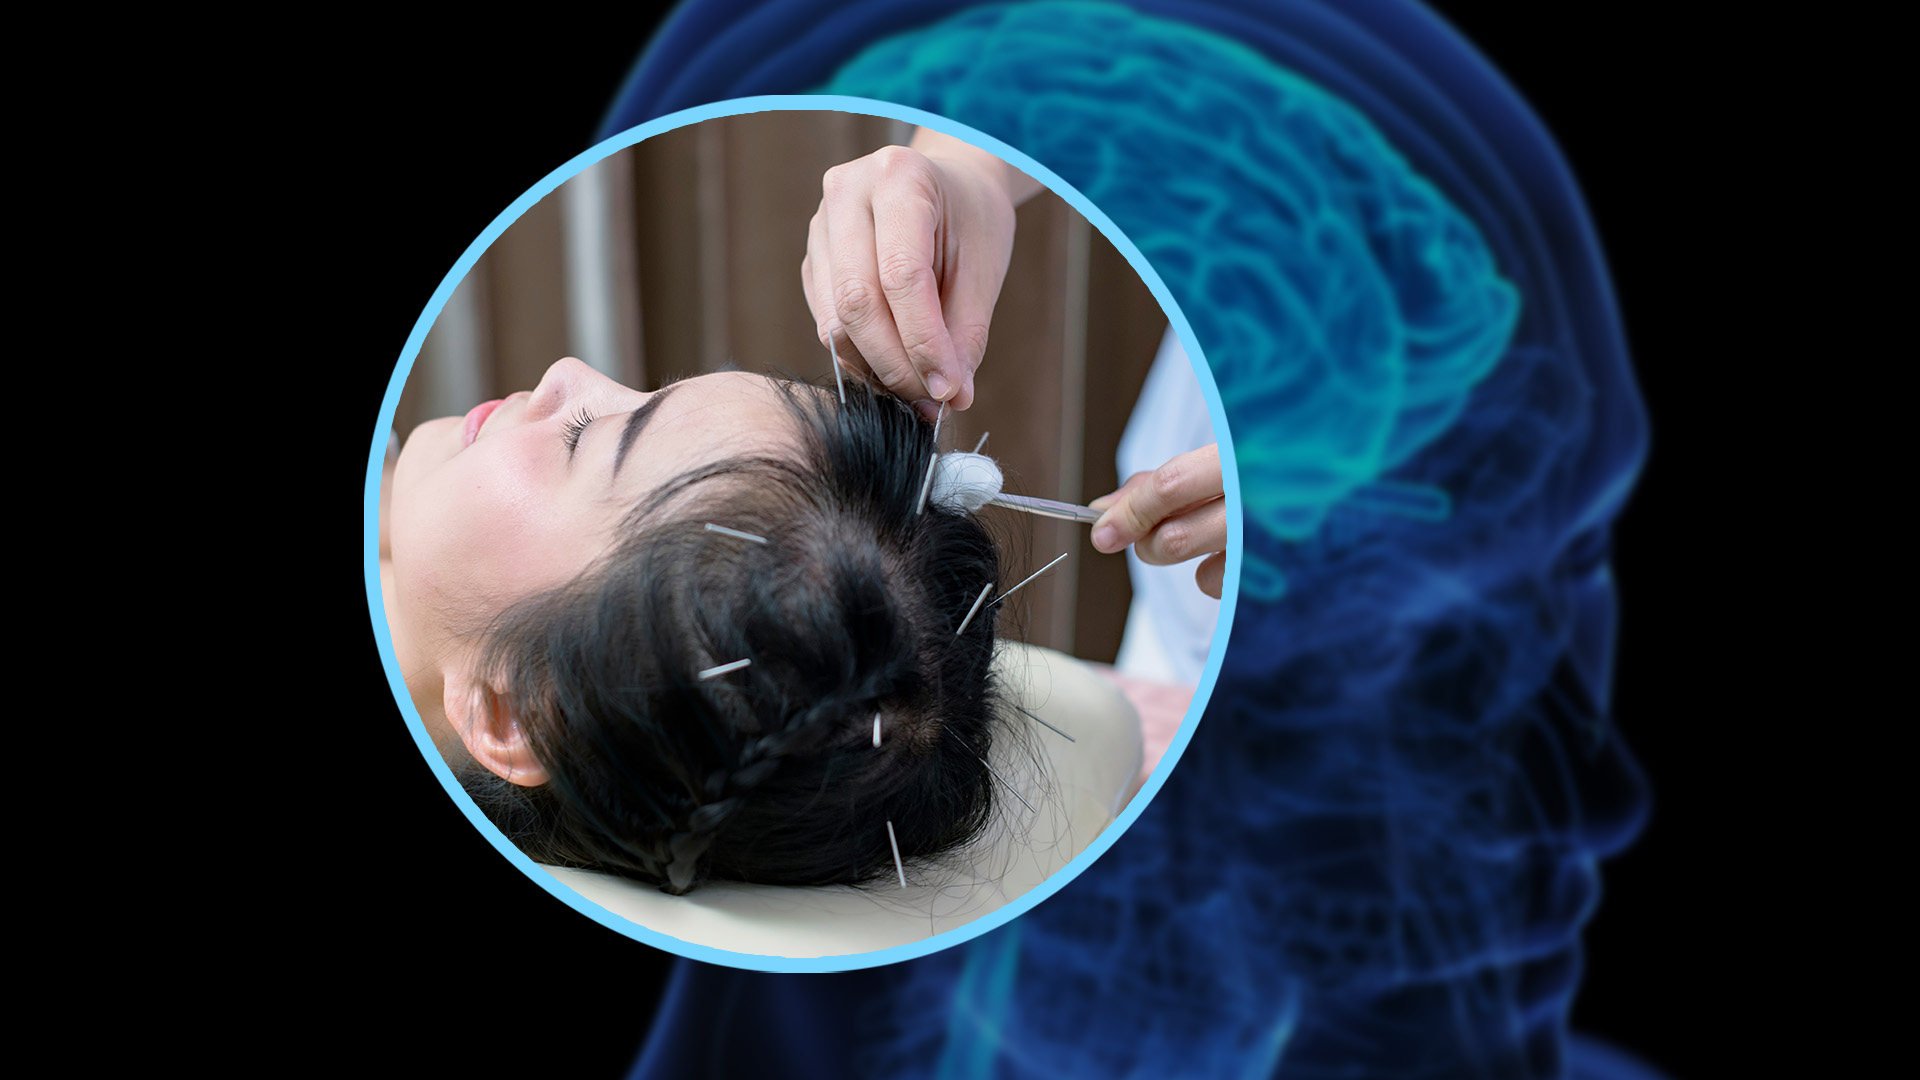 A clinic in China has claimed that it can boost the IQ of people by performing acupuncture on their heads. Photo: SCMP composite/Shutterstock